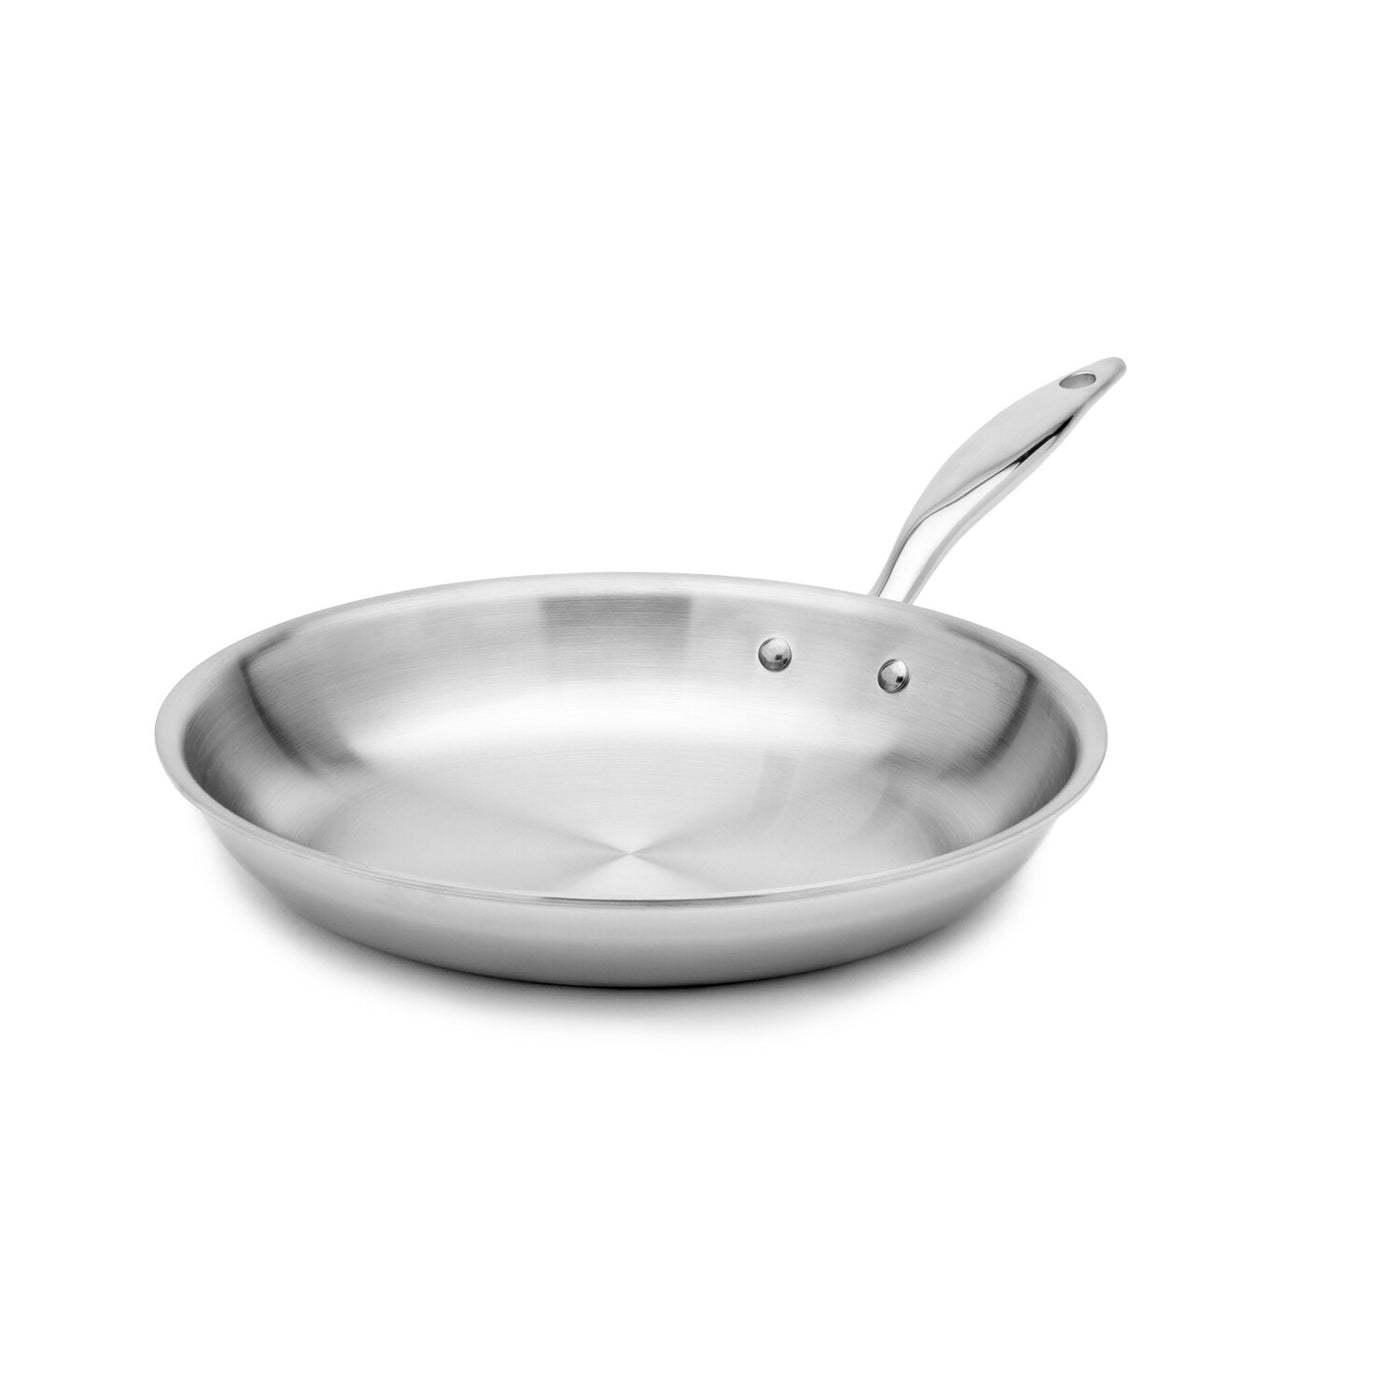 Sauté Pan - 12 or 10 inch Stainless Steel - Made in USA - American Kitchen